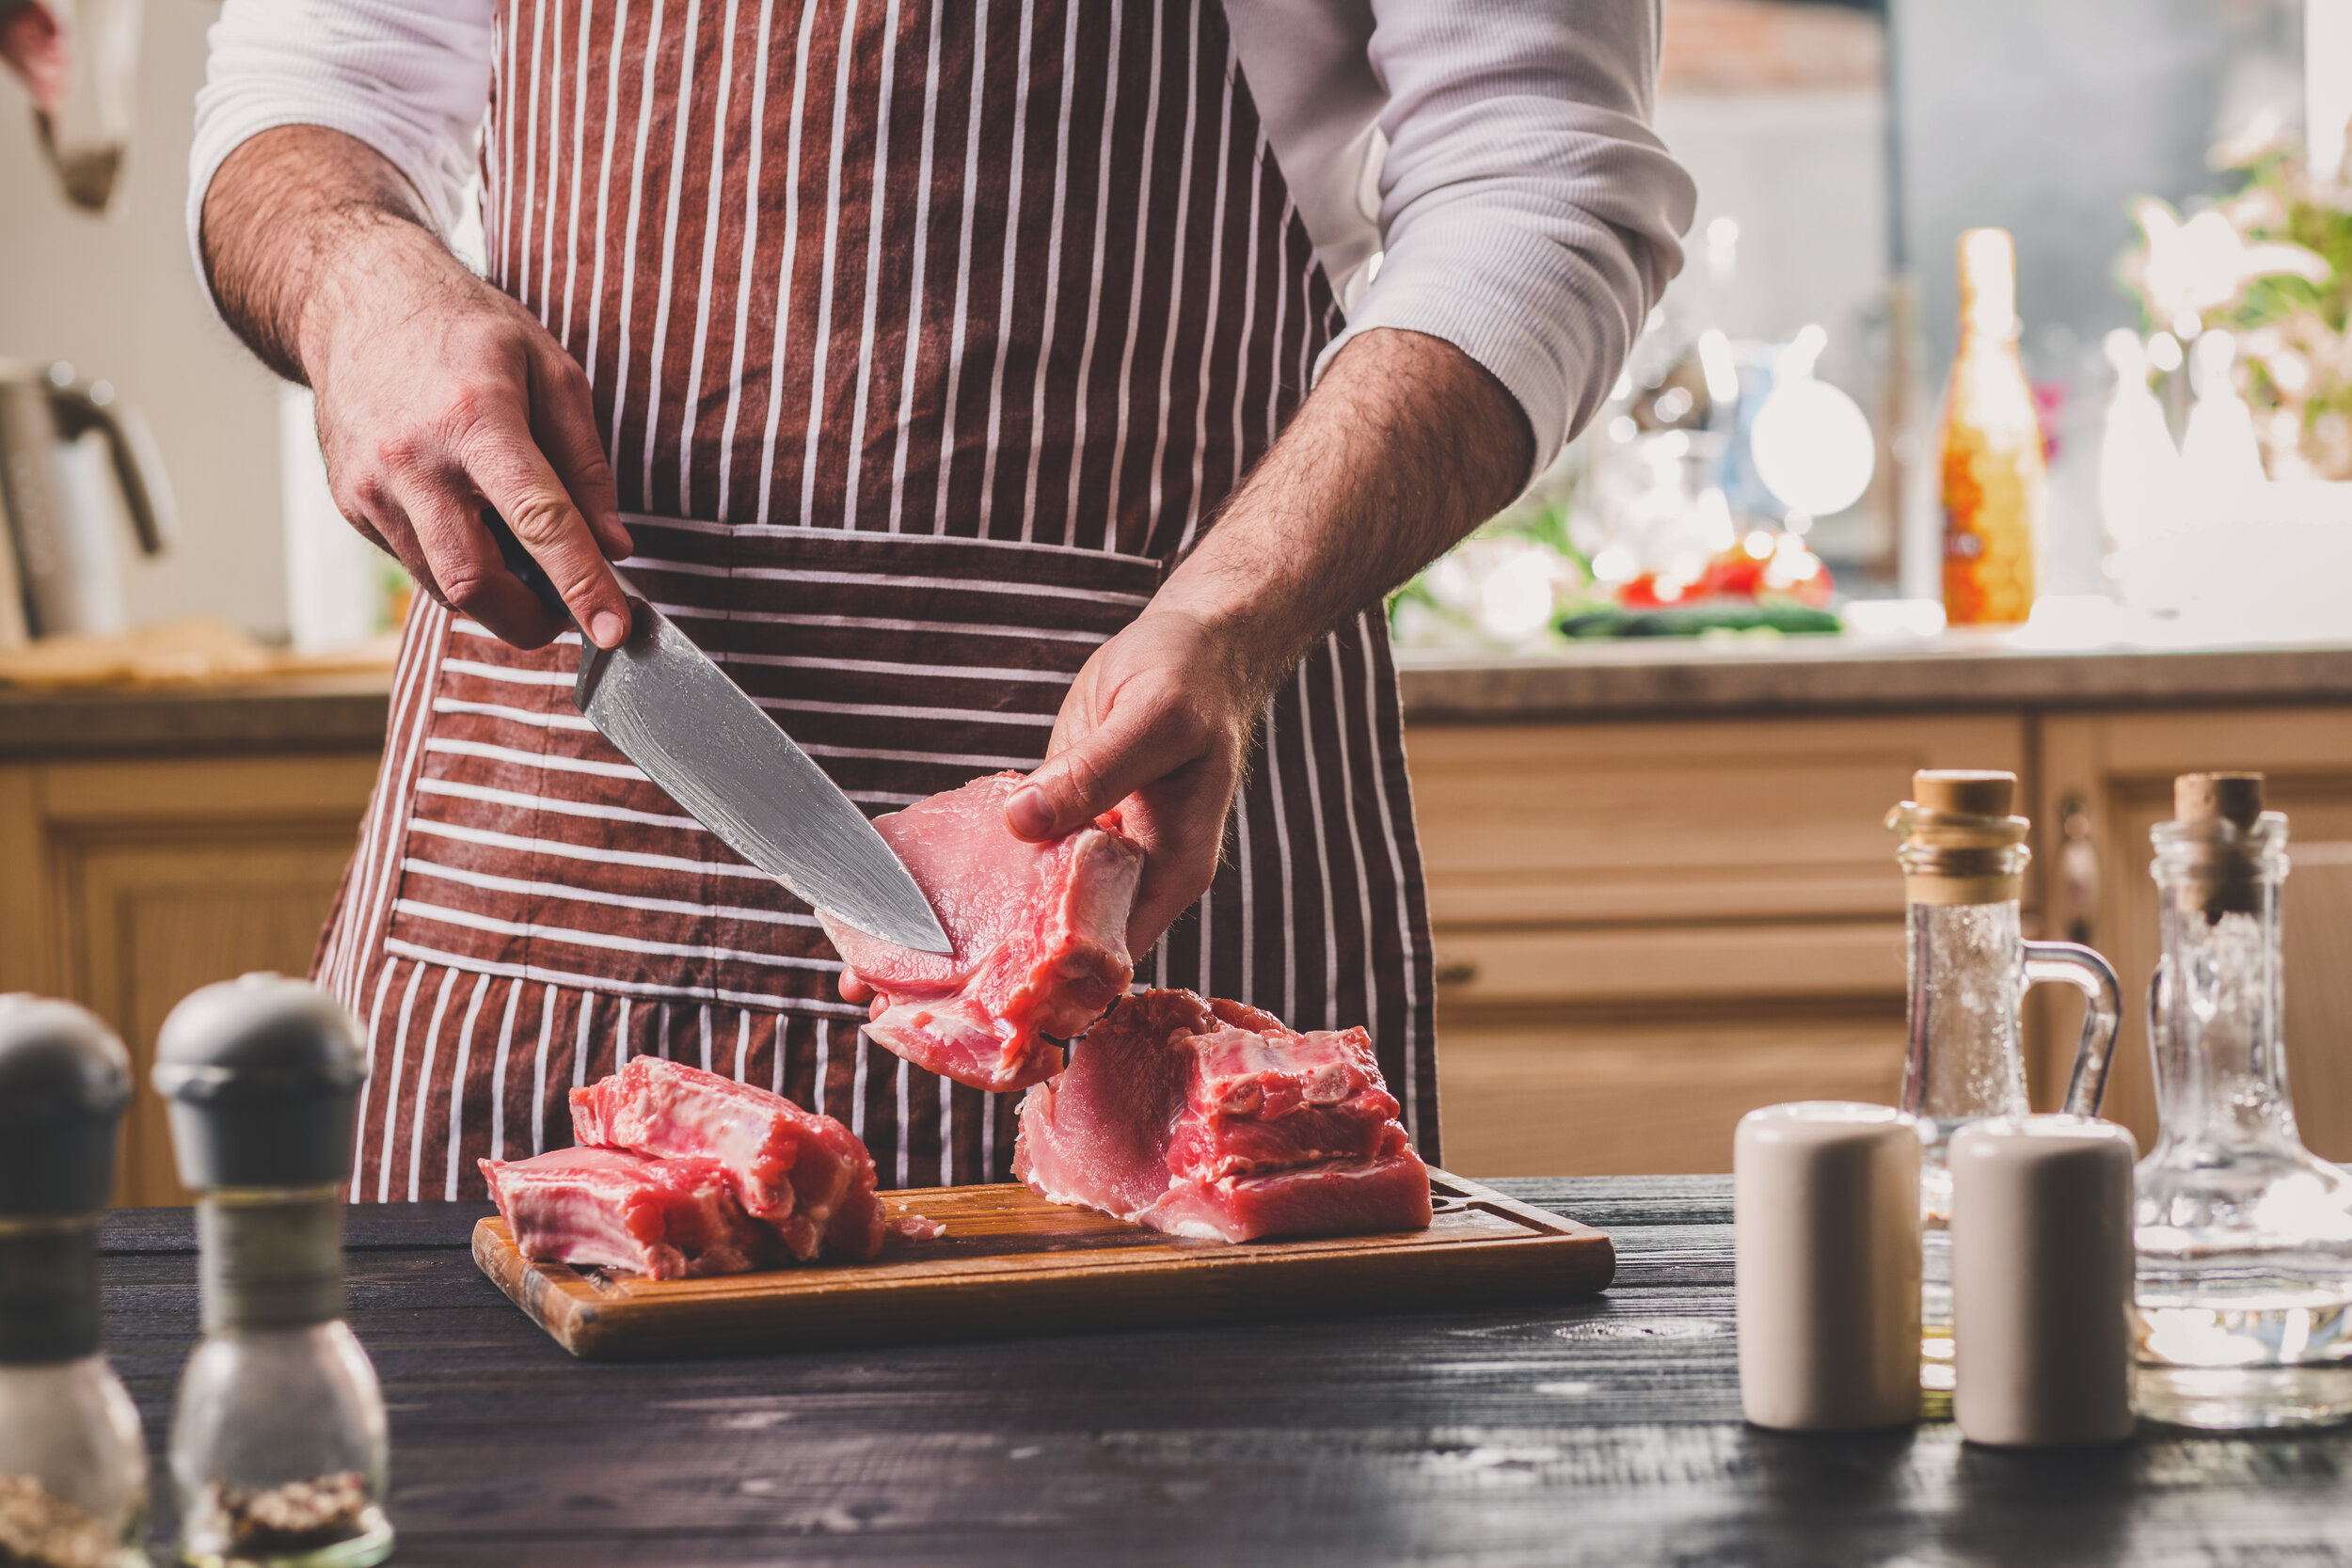 Man-cuts-of-fresh-piece-of-meat-on-a-wooden-cutting-board-in-the-home-kitchen-683987742_5760x3840.jpeg